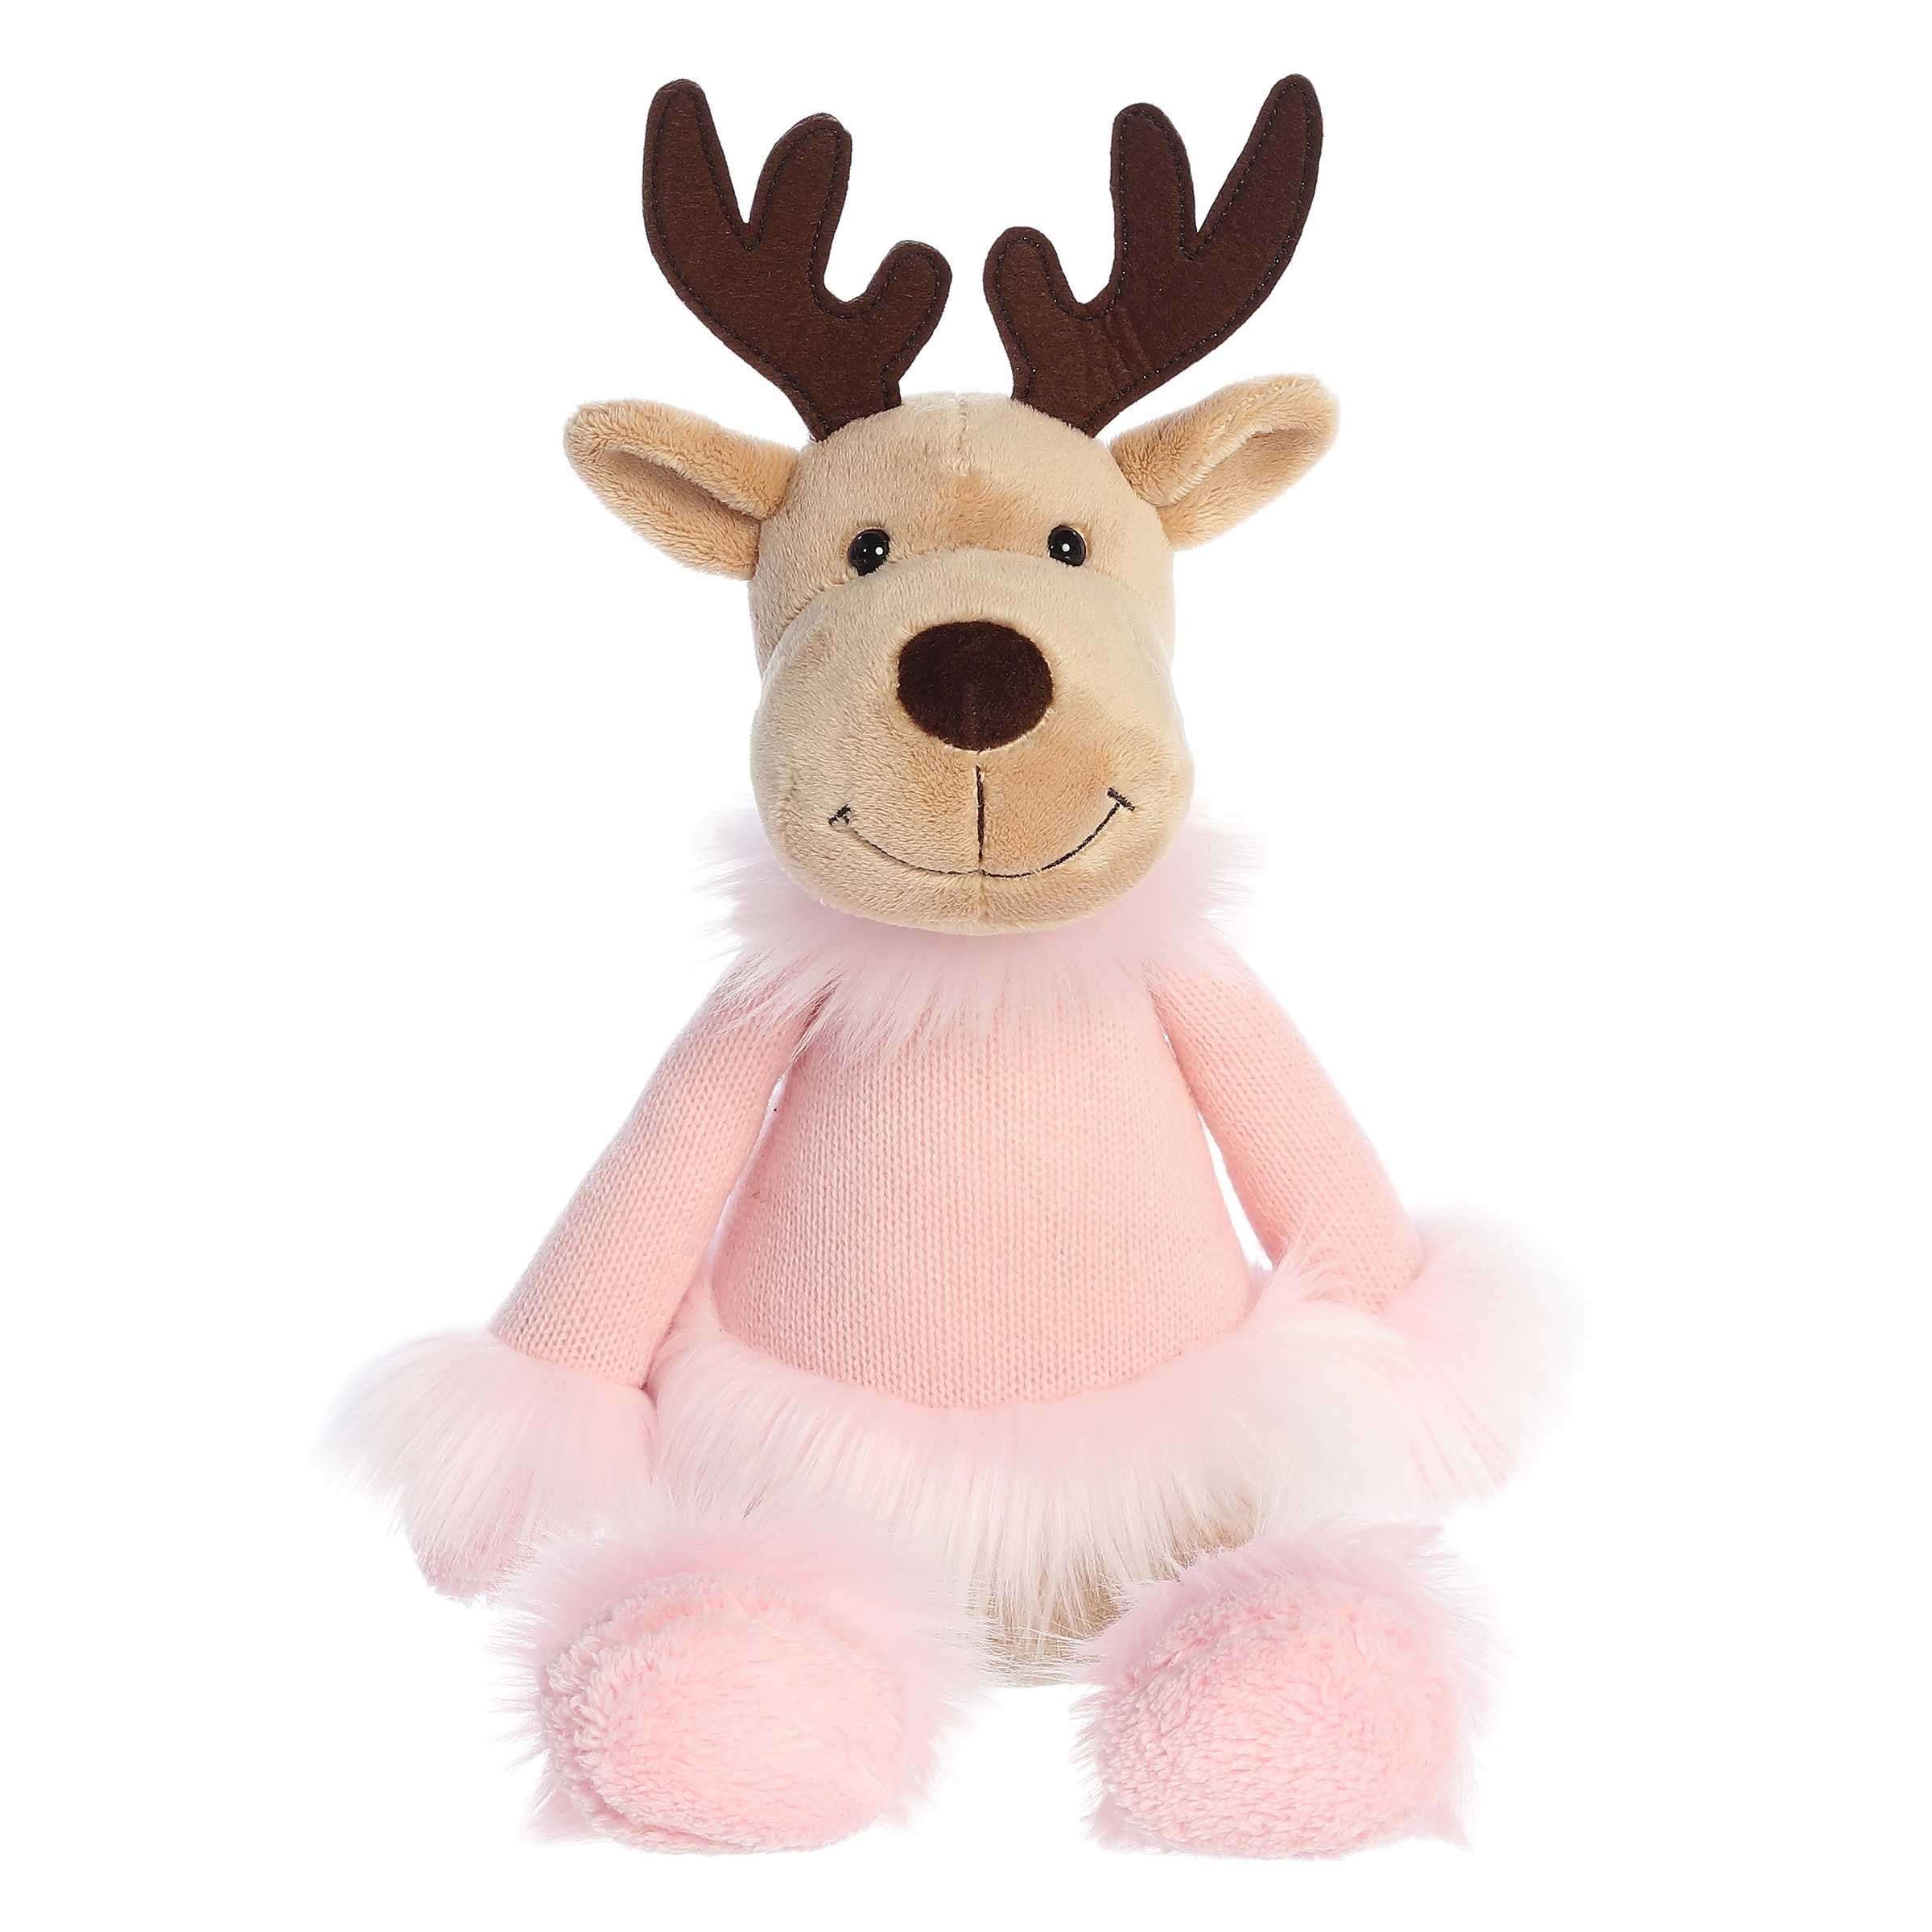 Brown deer stuffed animal with huggable long arms and legs, dressed in all-pink with fuzzy fur on the cuffs and collar